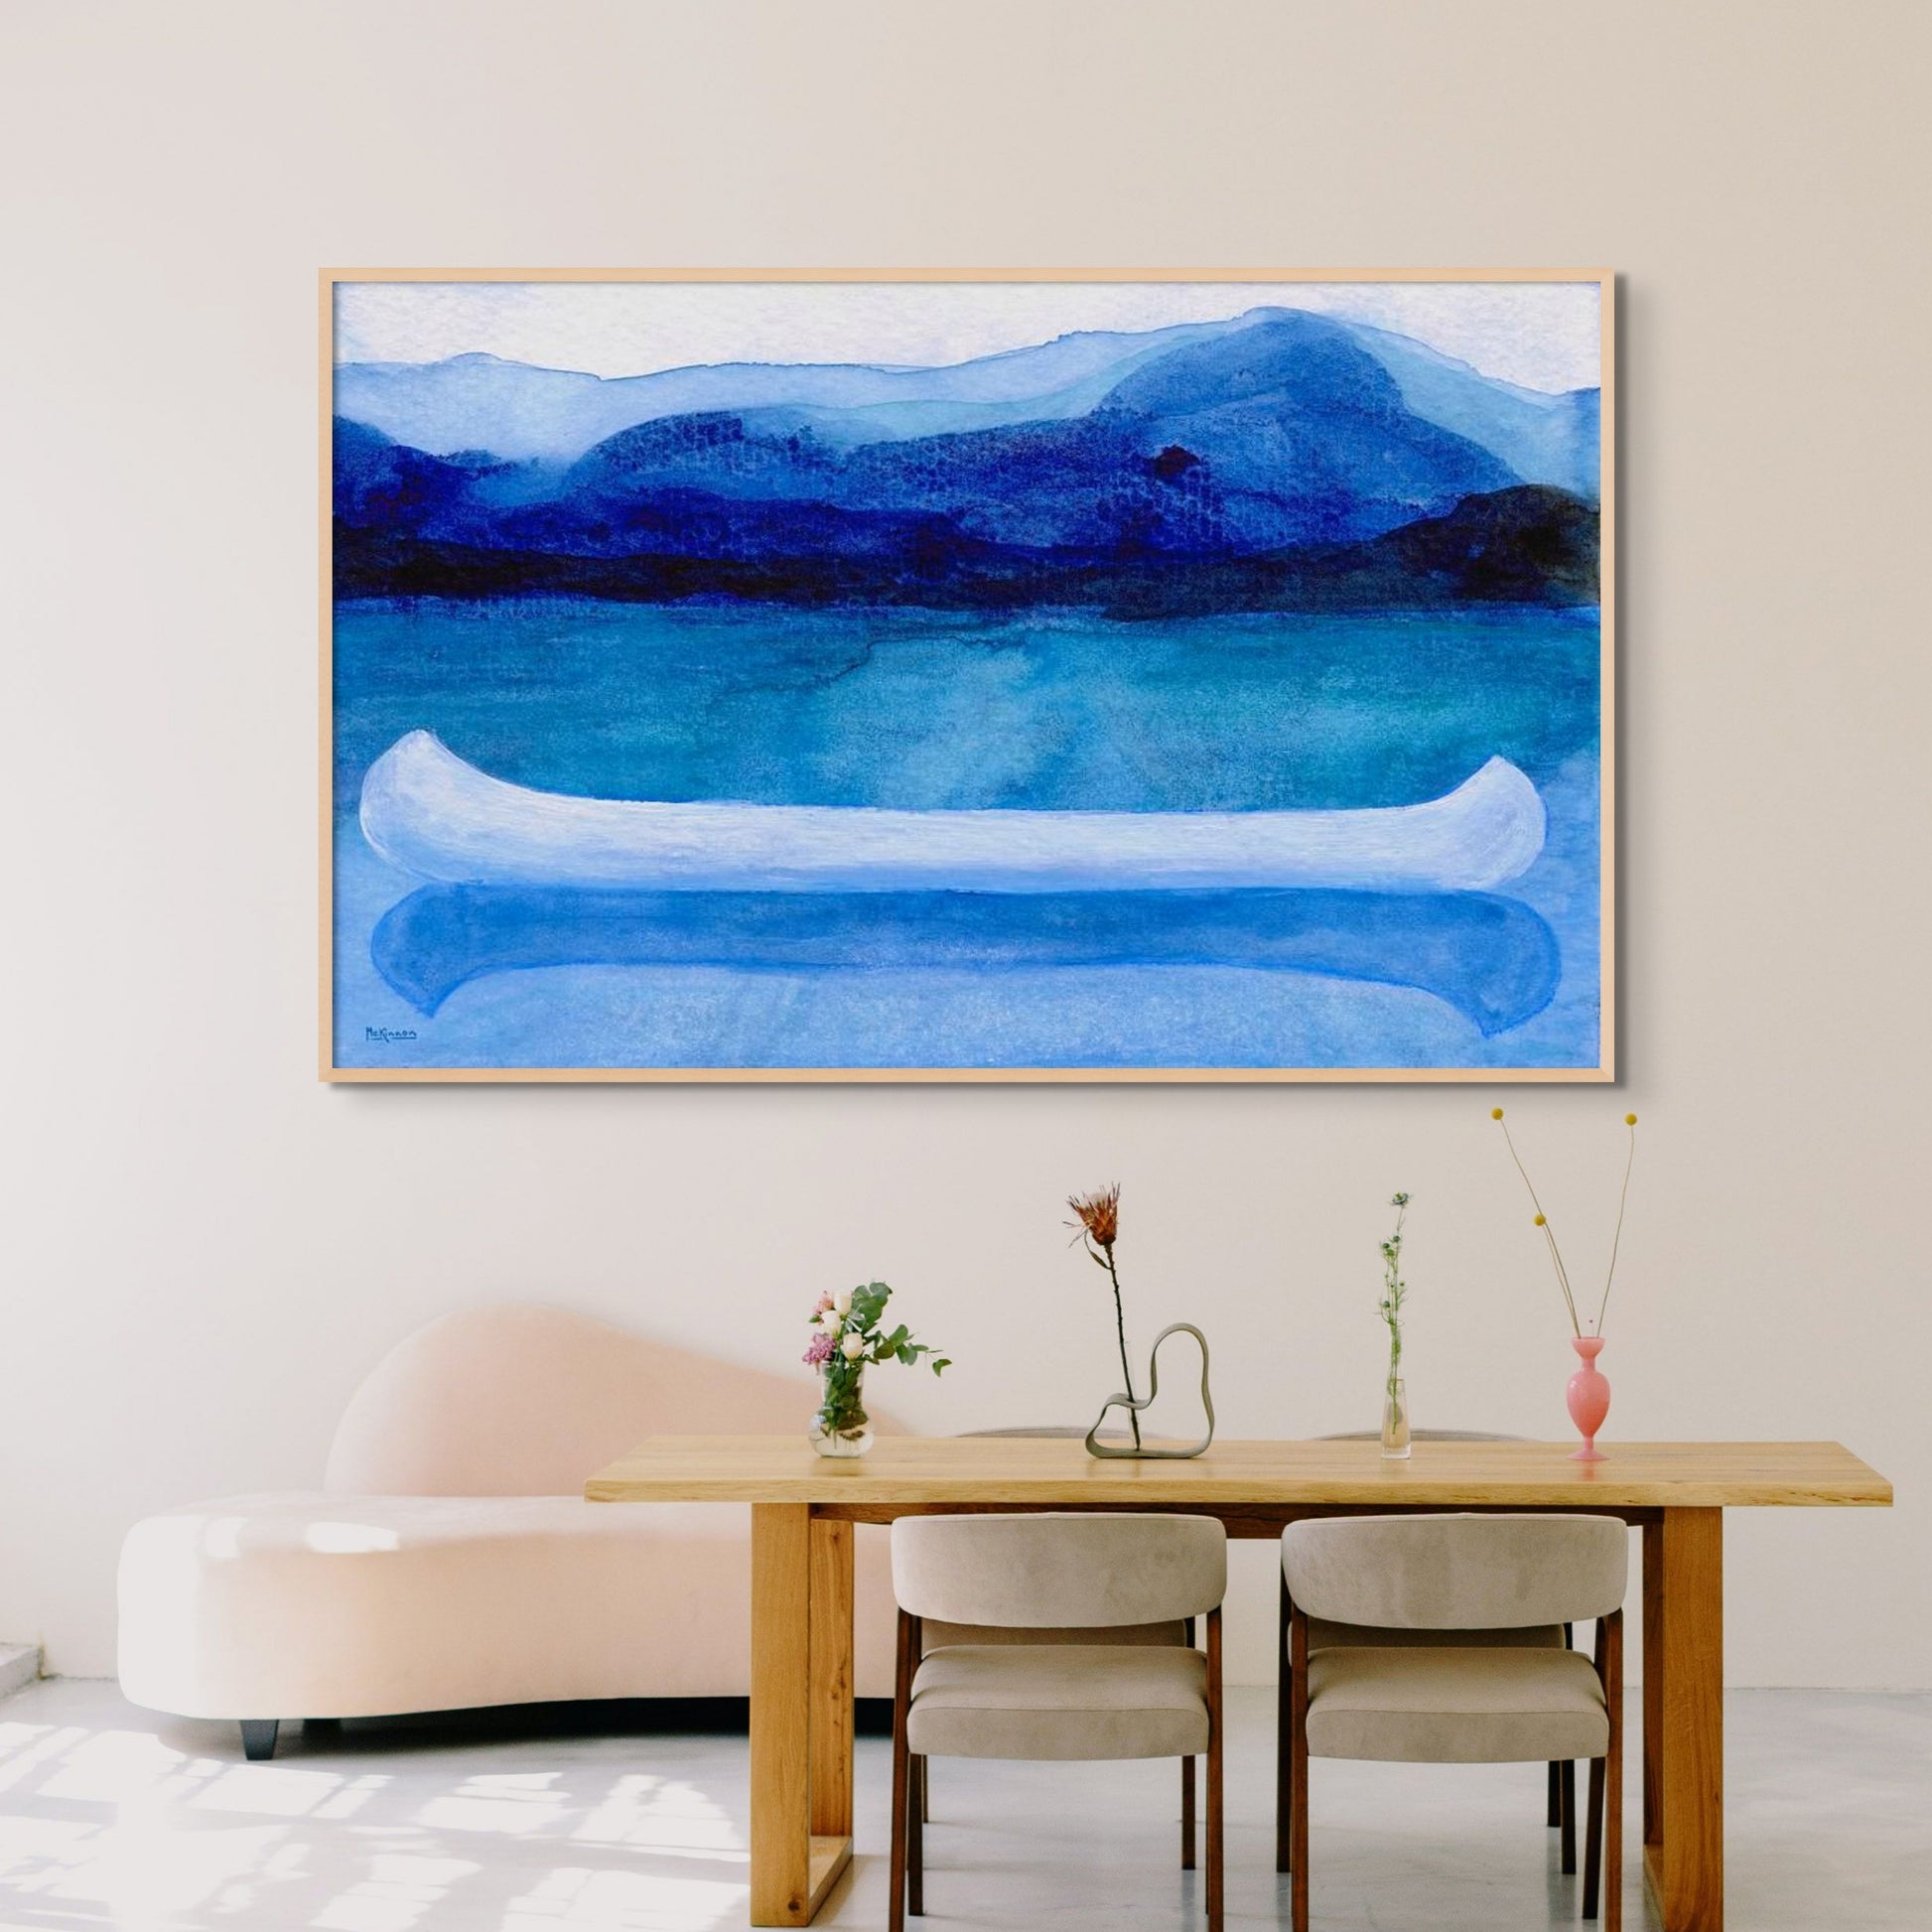 A work of canoeing art by Canadian artist Catherine McKinnon. The watercolor depicts a small white boat, a "canoe", on blue water with a dark blue distant shore and lighter blue distant moutains. The giclee print is framed in light natural wood and is mounted on a light gray wall above a beachy, light colored wood dining table and modern cream-colored settee.